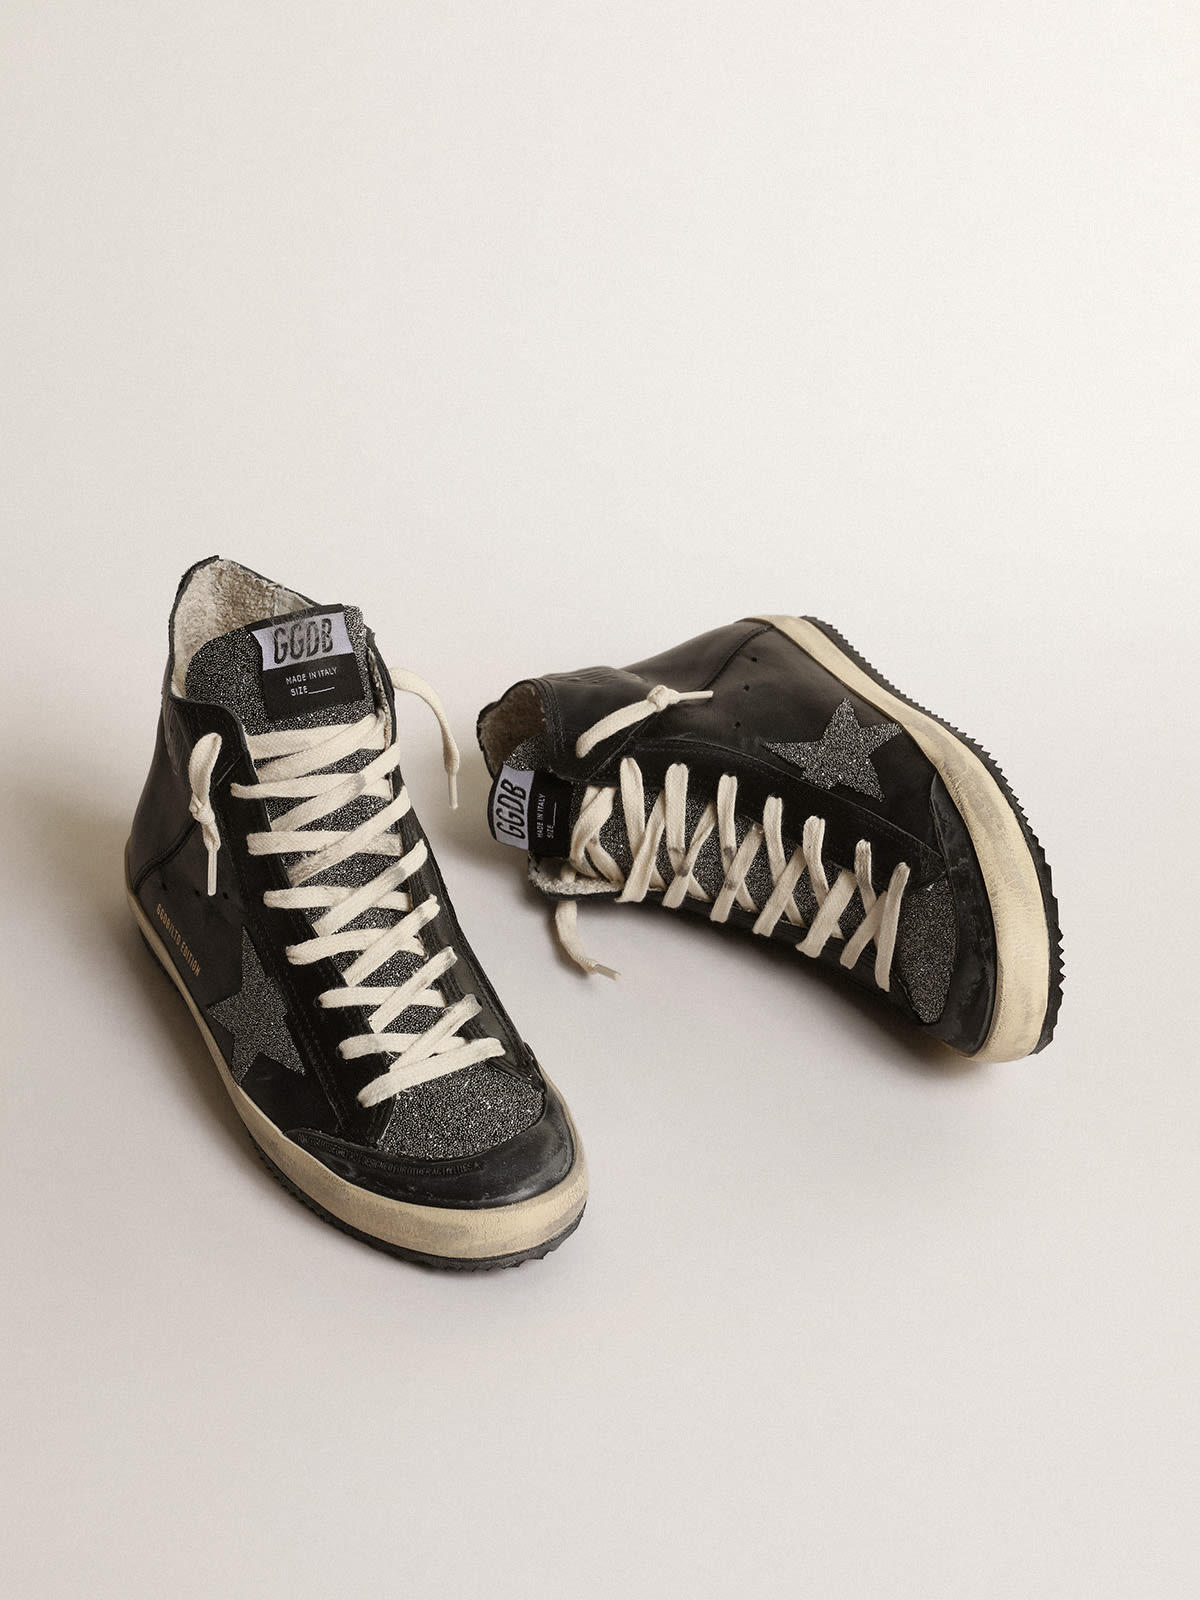 Golden Goose - Men’s Francy Penstar LAB in black nappa leather and leather with Swarovski inserts in 